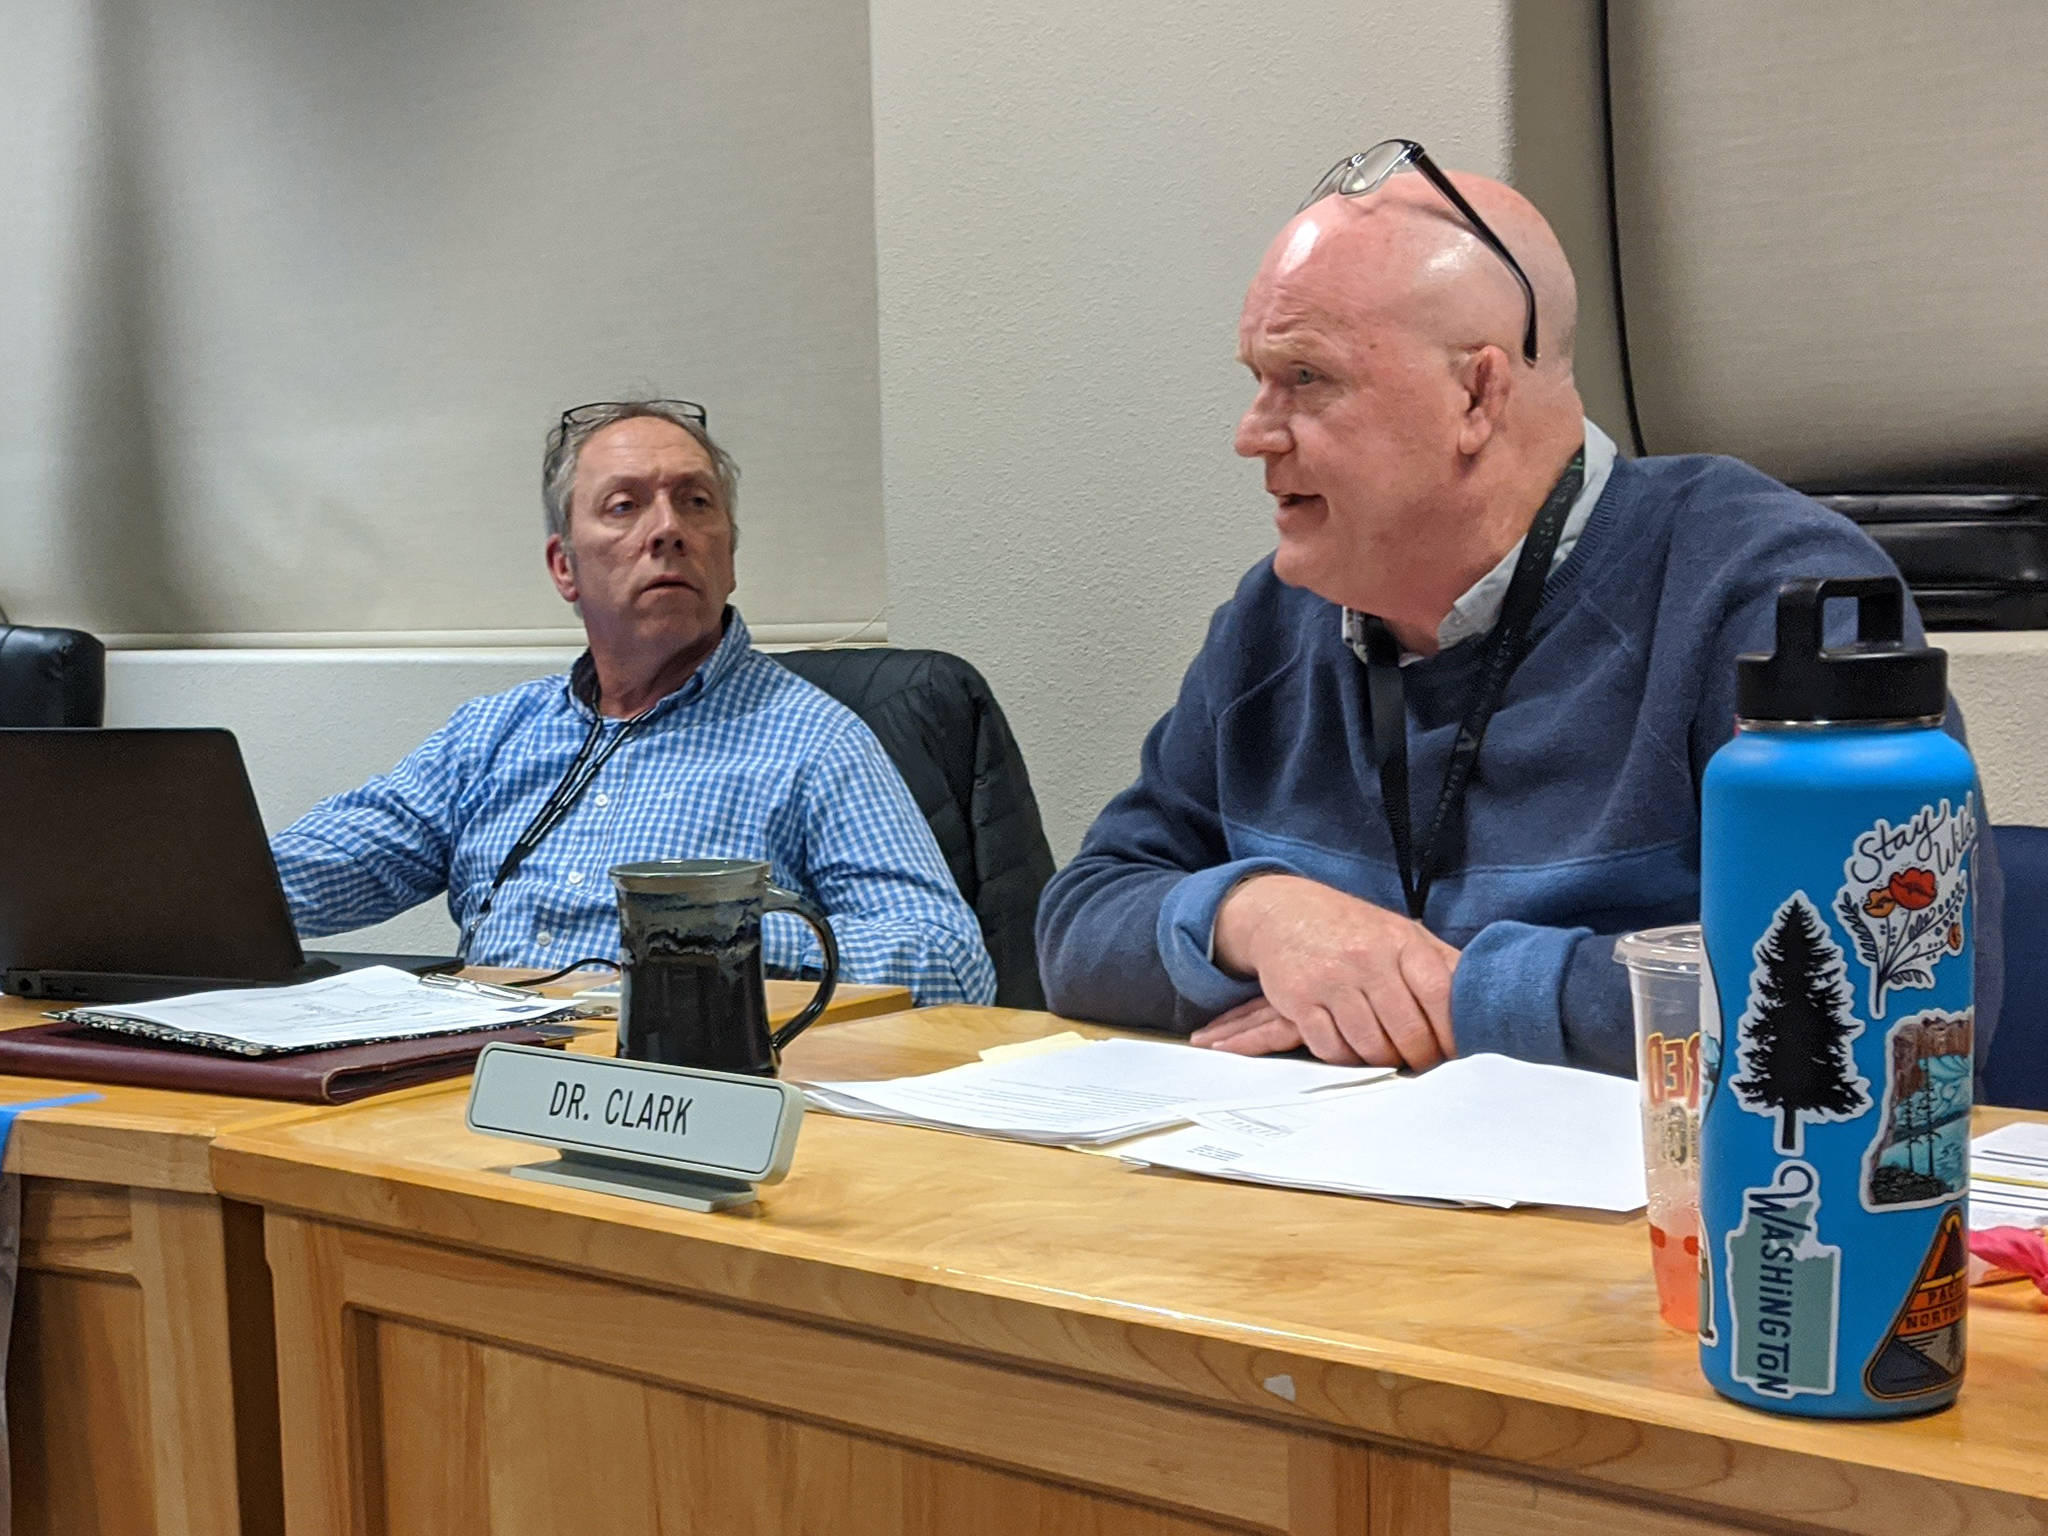 Sequim School District superintendent Rob Clark, right, discusses terms of his contract extension with the school board while board president Brandino Gibson listens on during the Jan. 21 school board meeting. Sequim Gazette photo by Conor Dowley